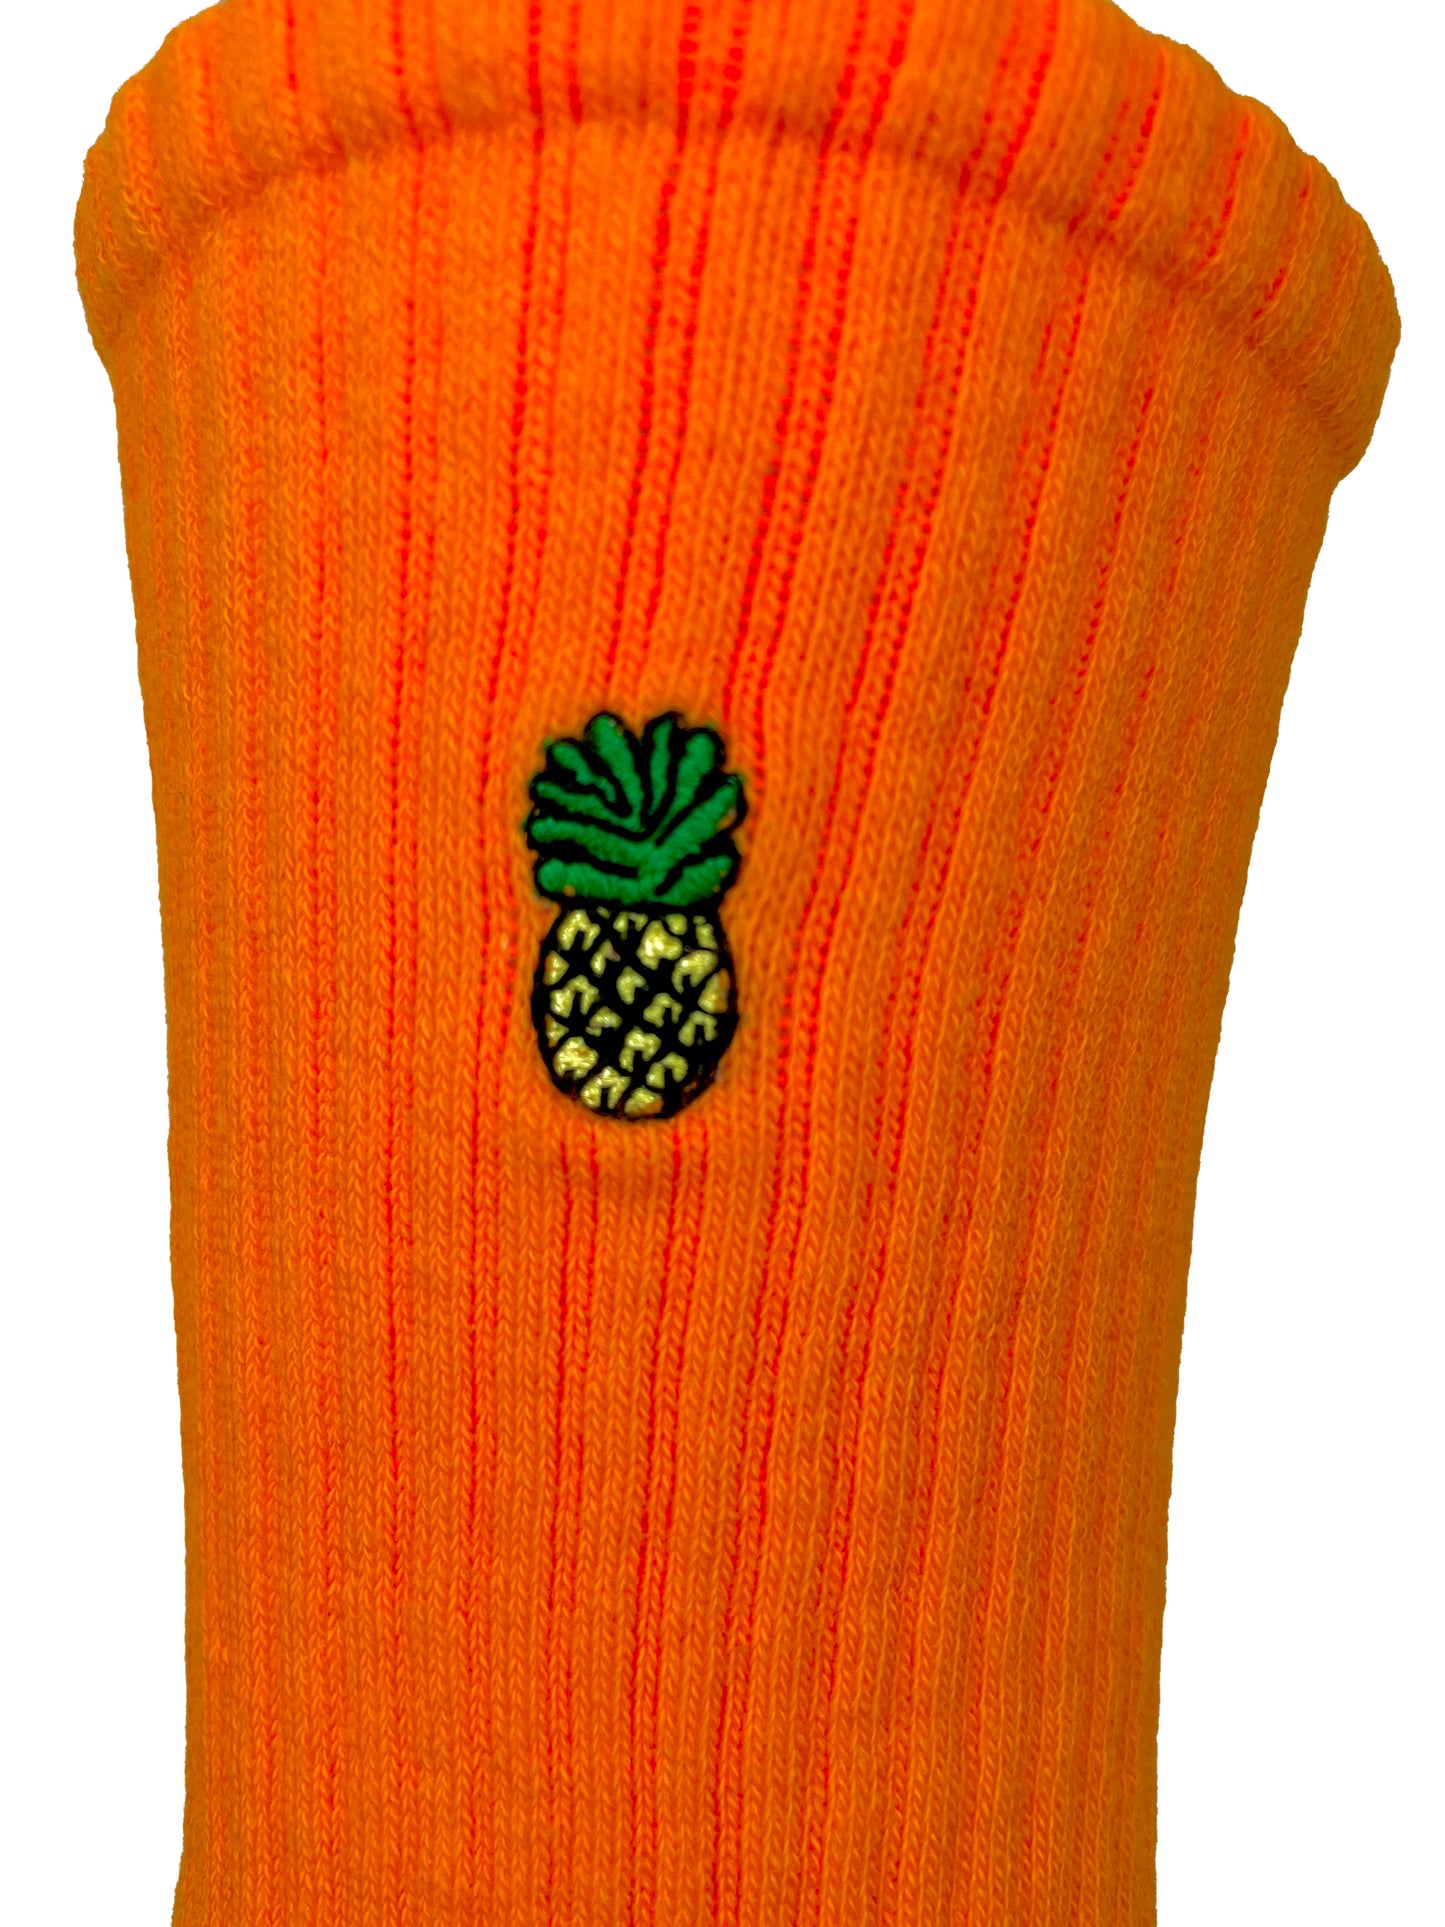 Embroidered Pineapple